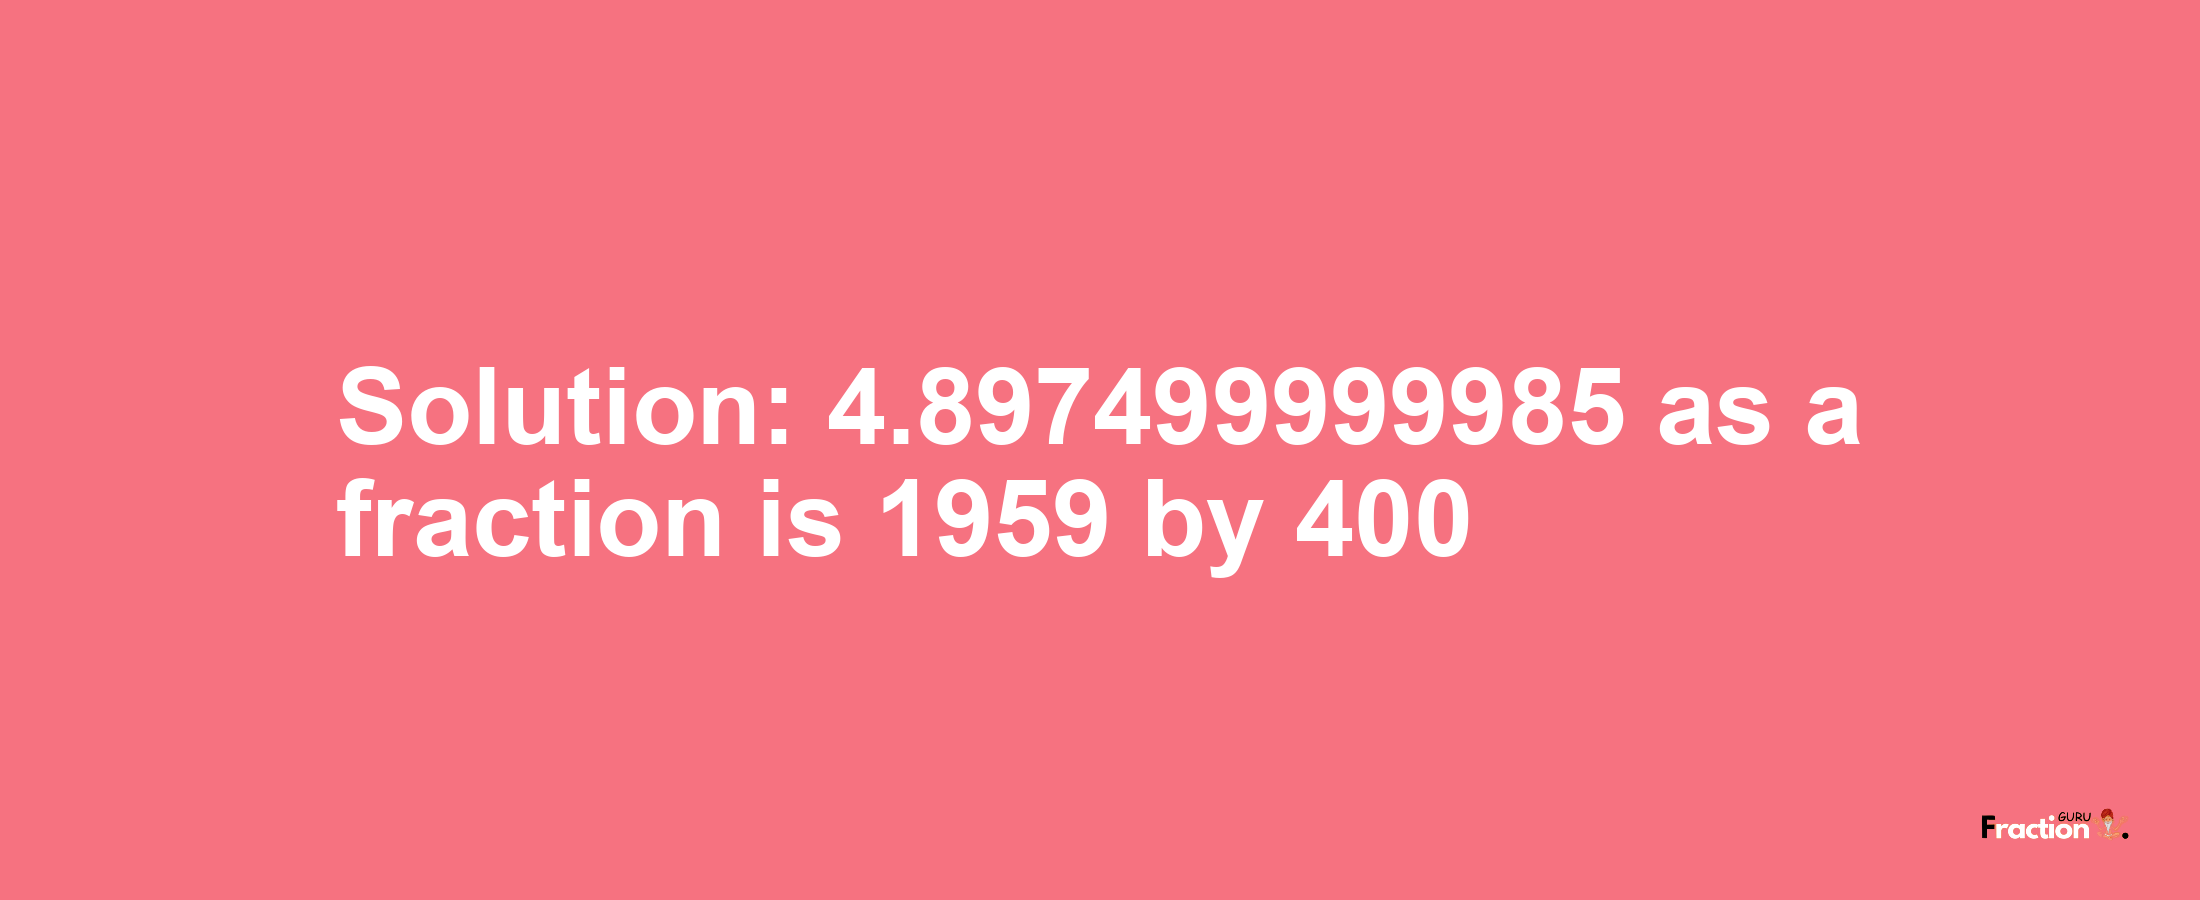 Solution:4.897499999985 as a fraction is 1959/400